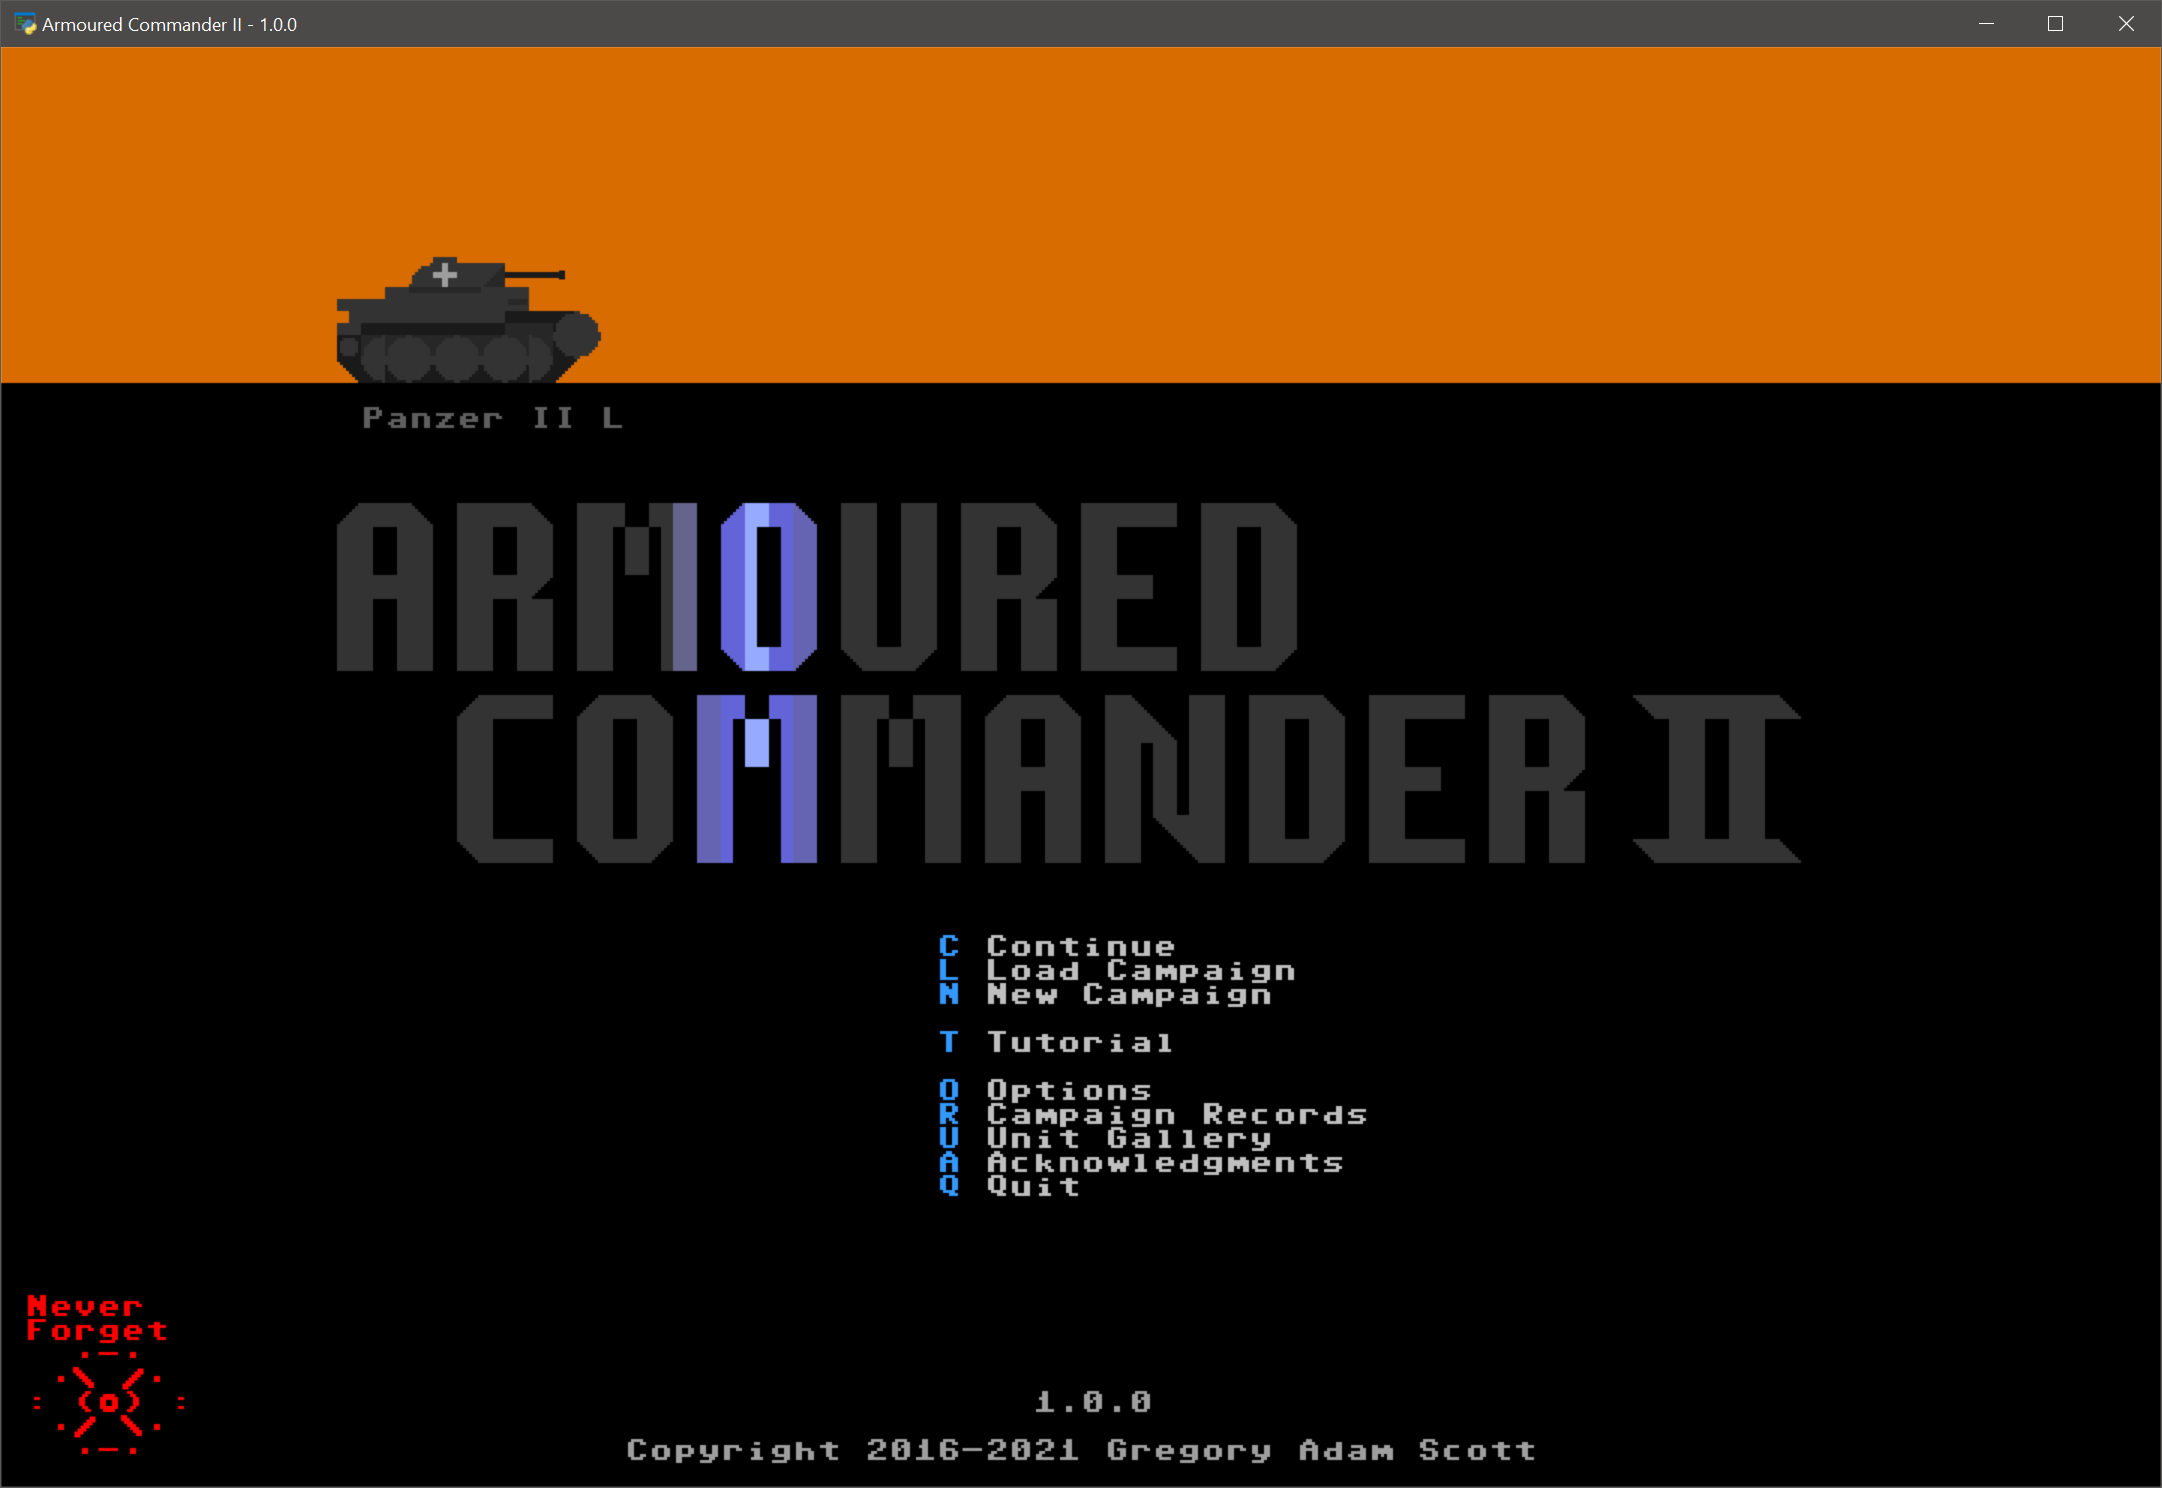 Armoured Commander II - Complete Manual Guide and Gameplay for New Players - 2. Main Menu - C2422B8